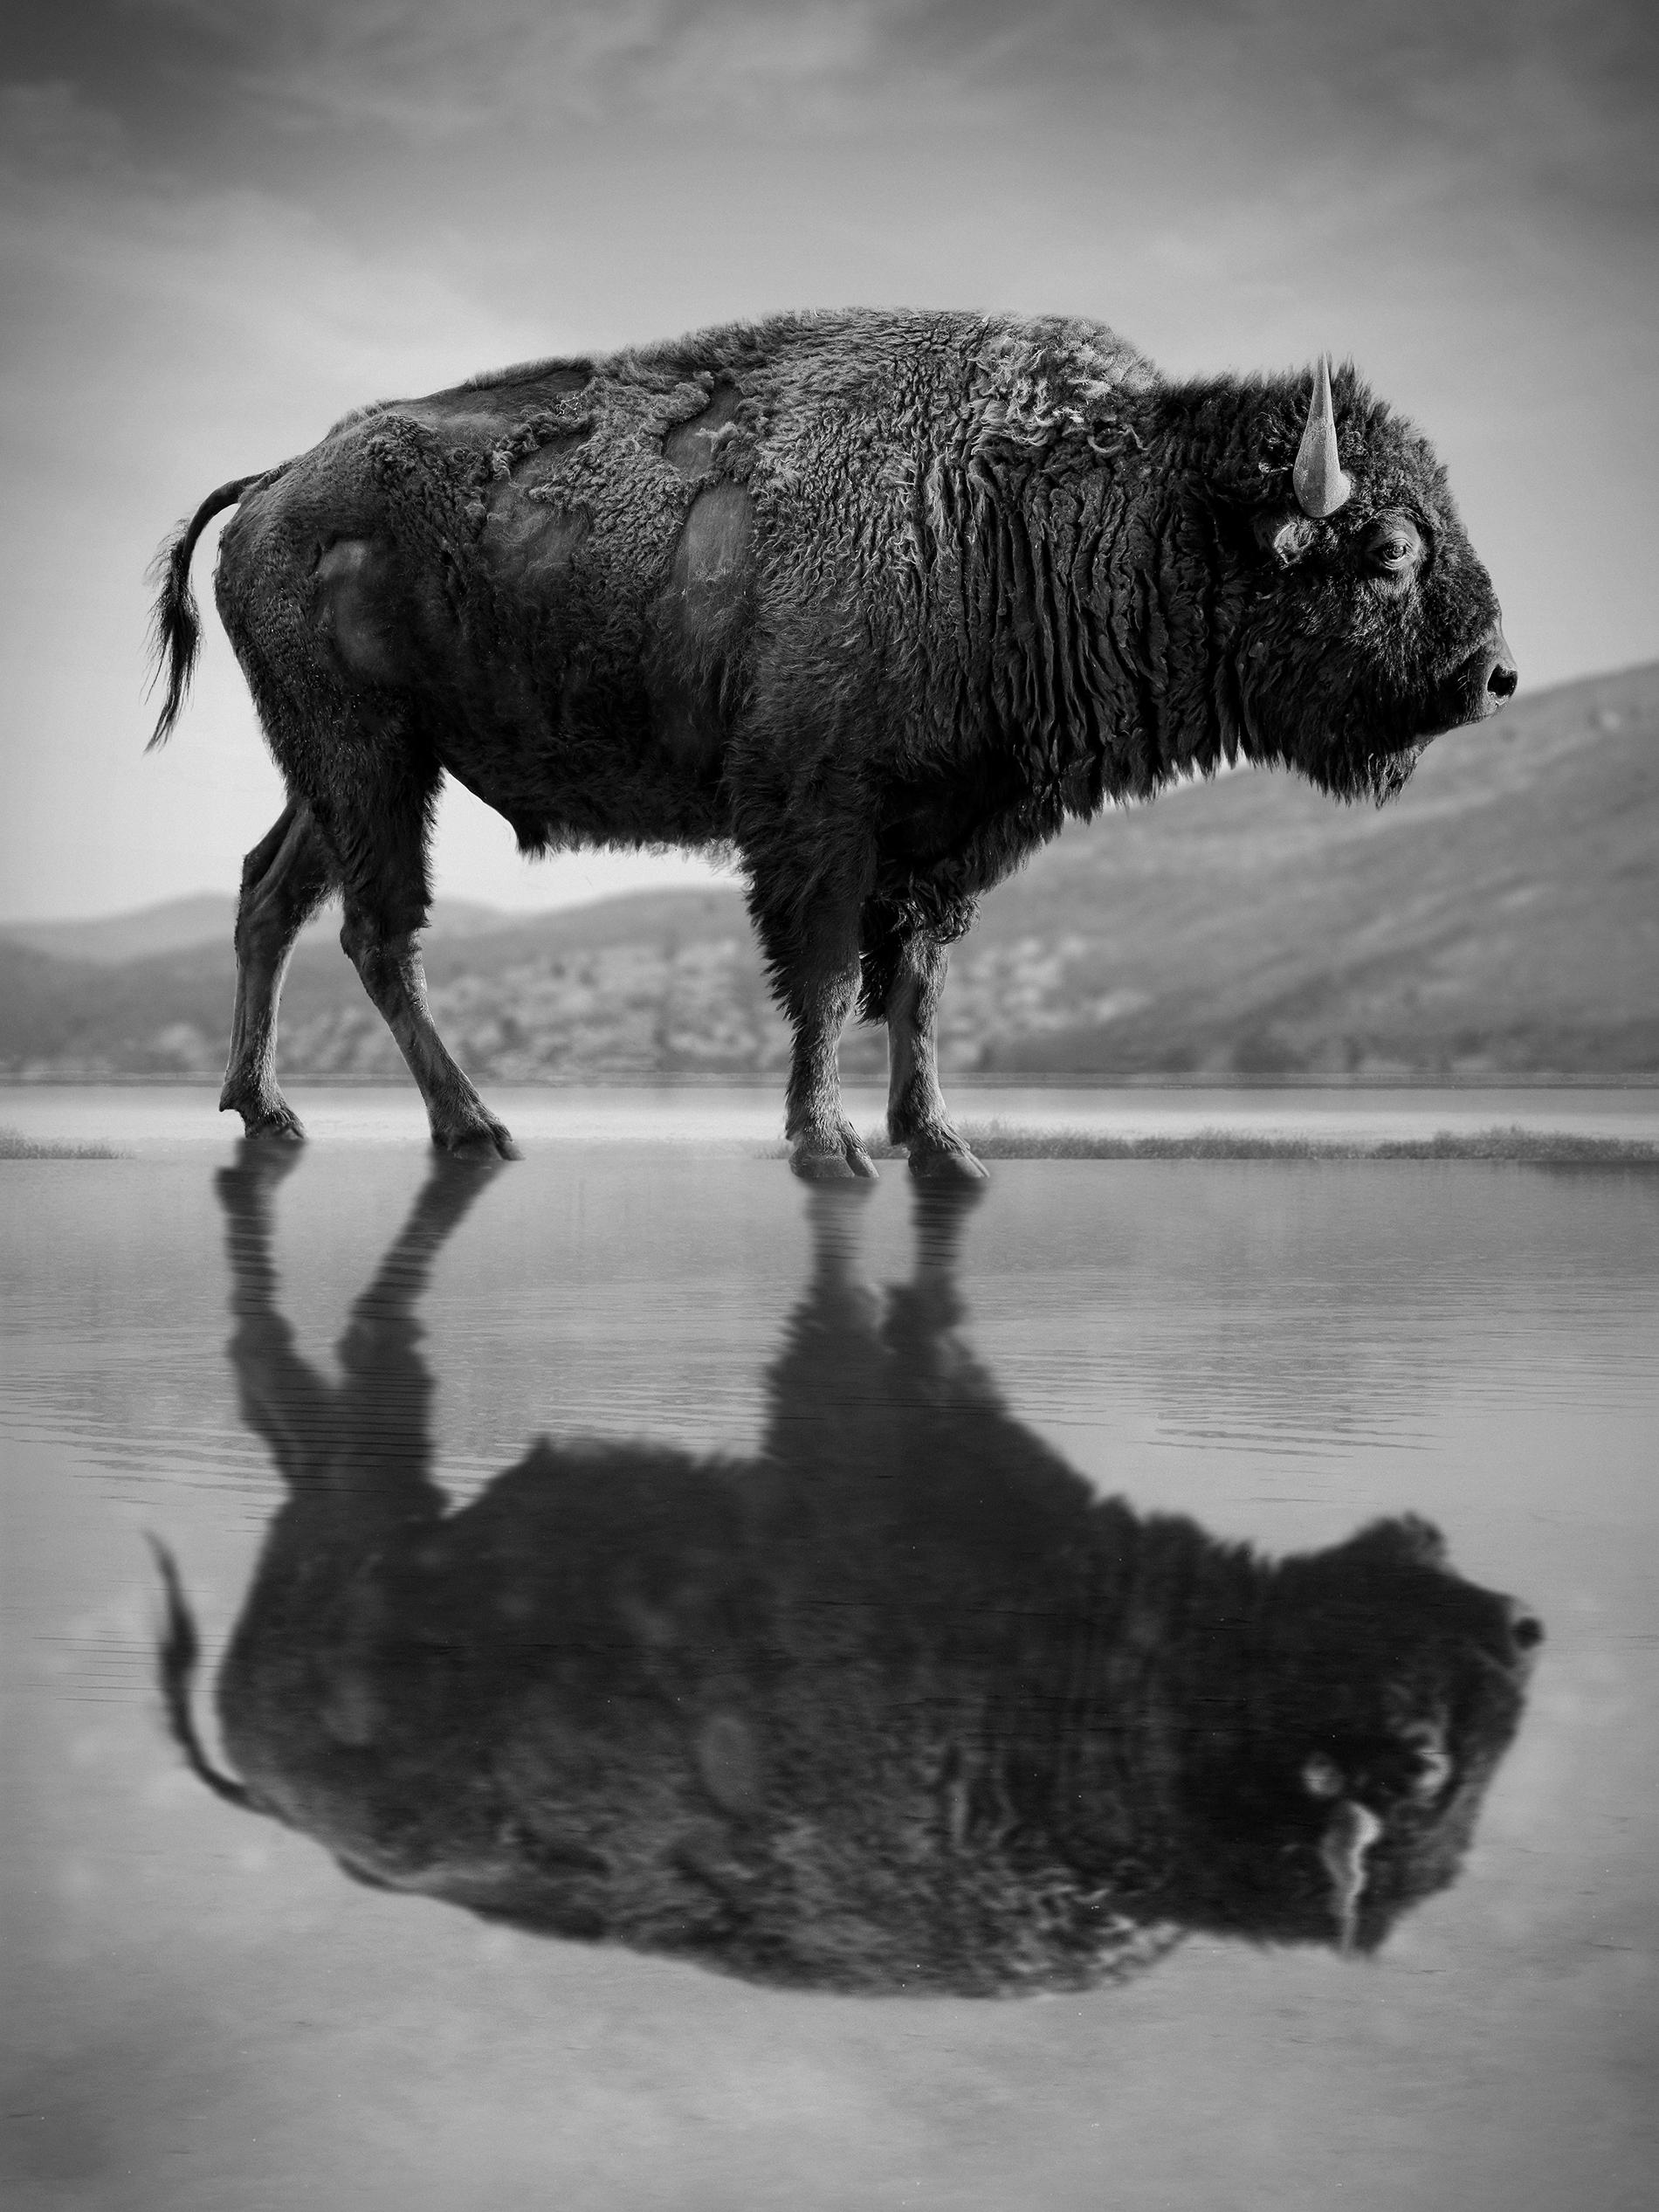 "Old World" 36x48  Black & White Photography Bison Buffalo by Shane Russeck